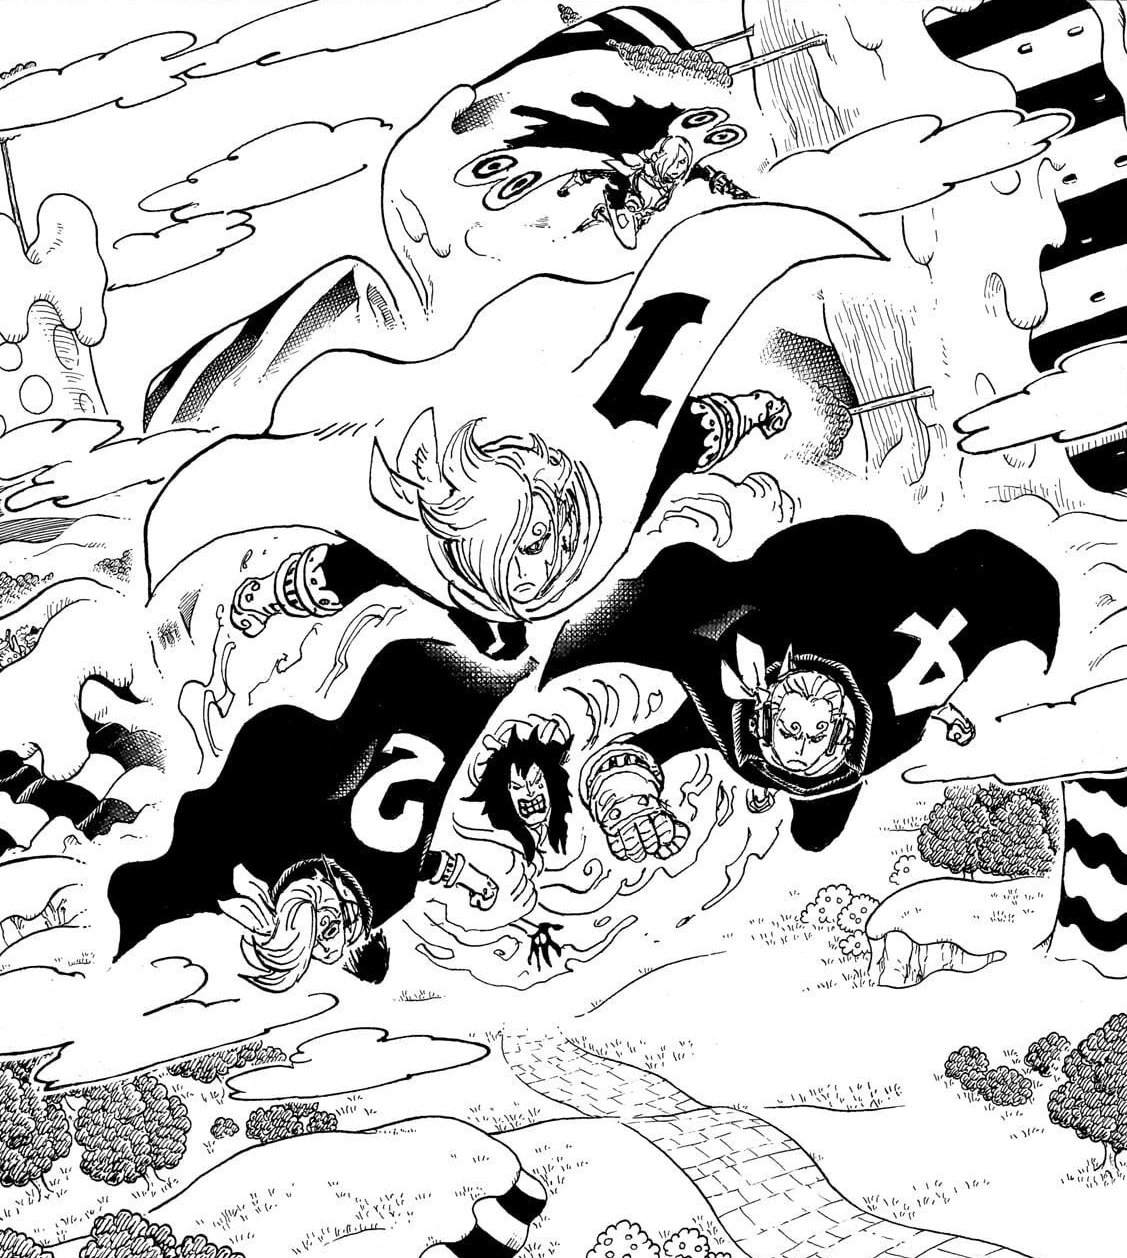 ONE PIECE Germa 66 - One Piece 1058-1061 Titles and Staff.